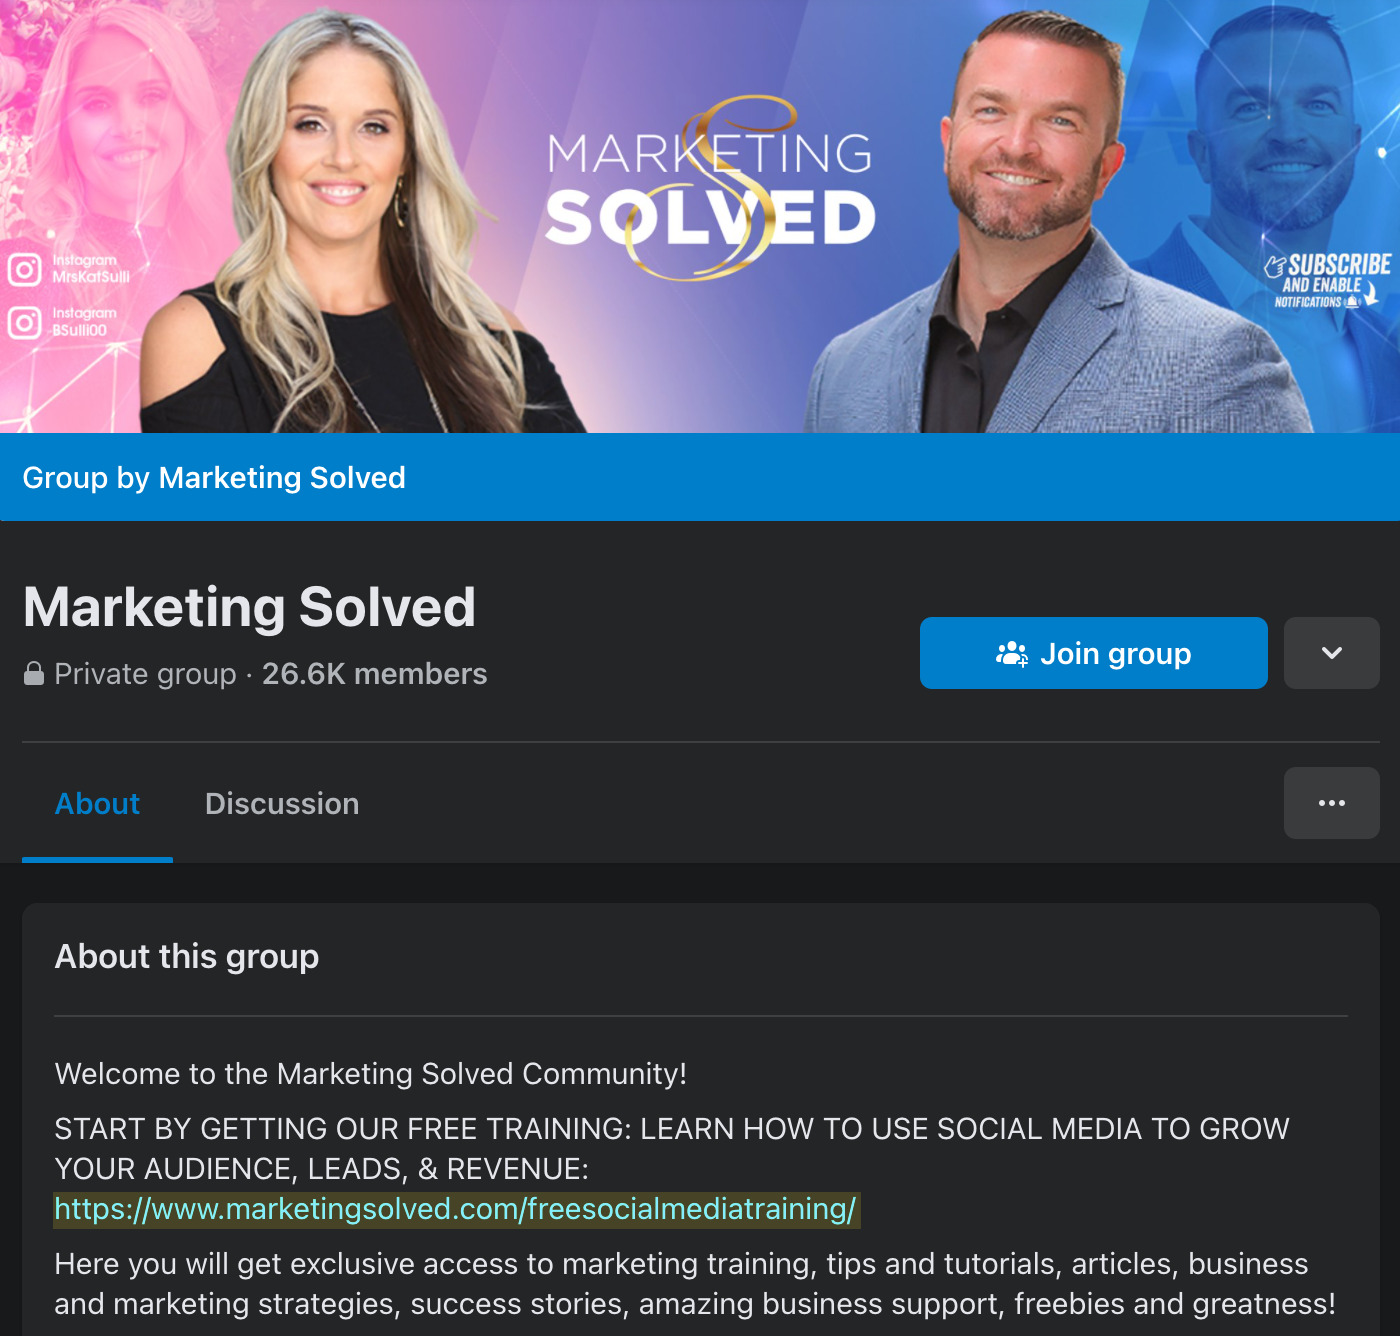 Marketing Solved community promoting a free course